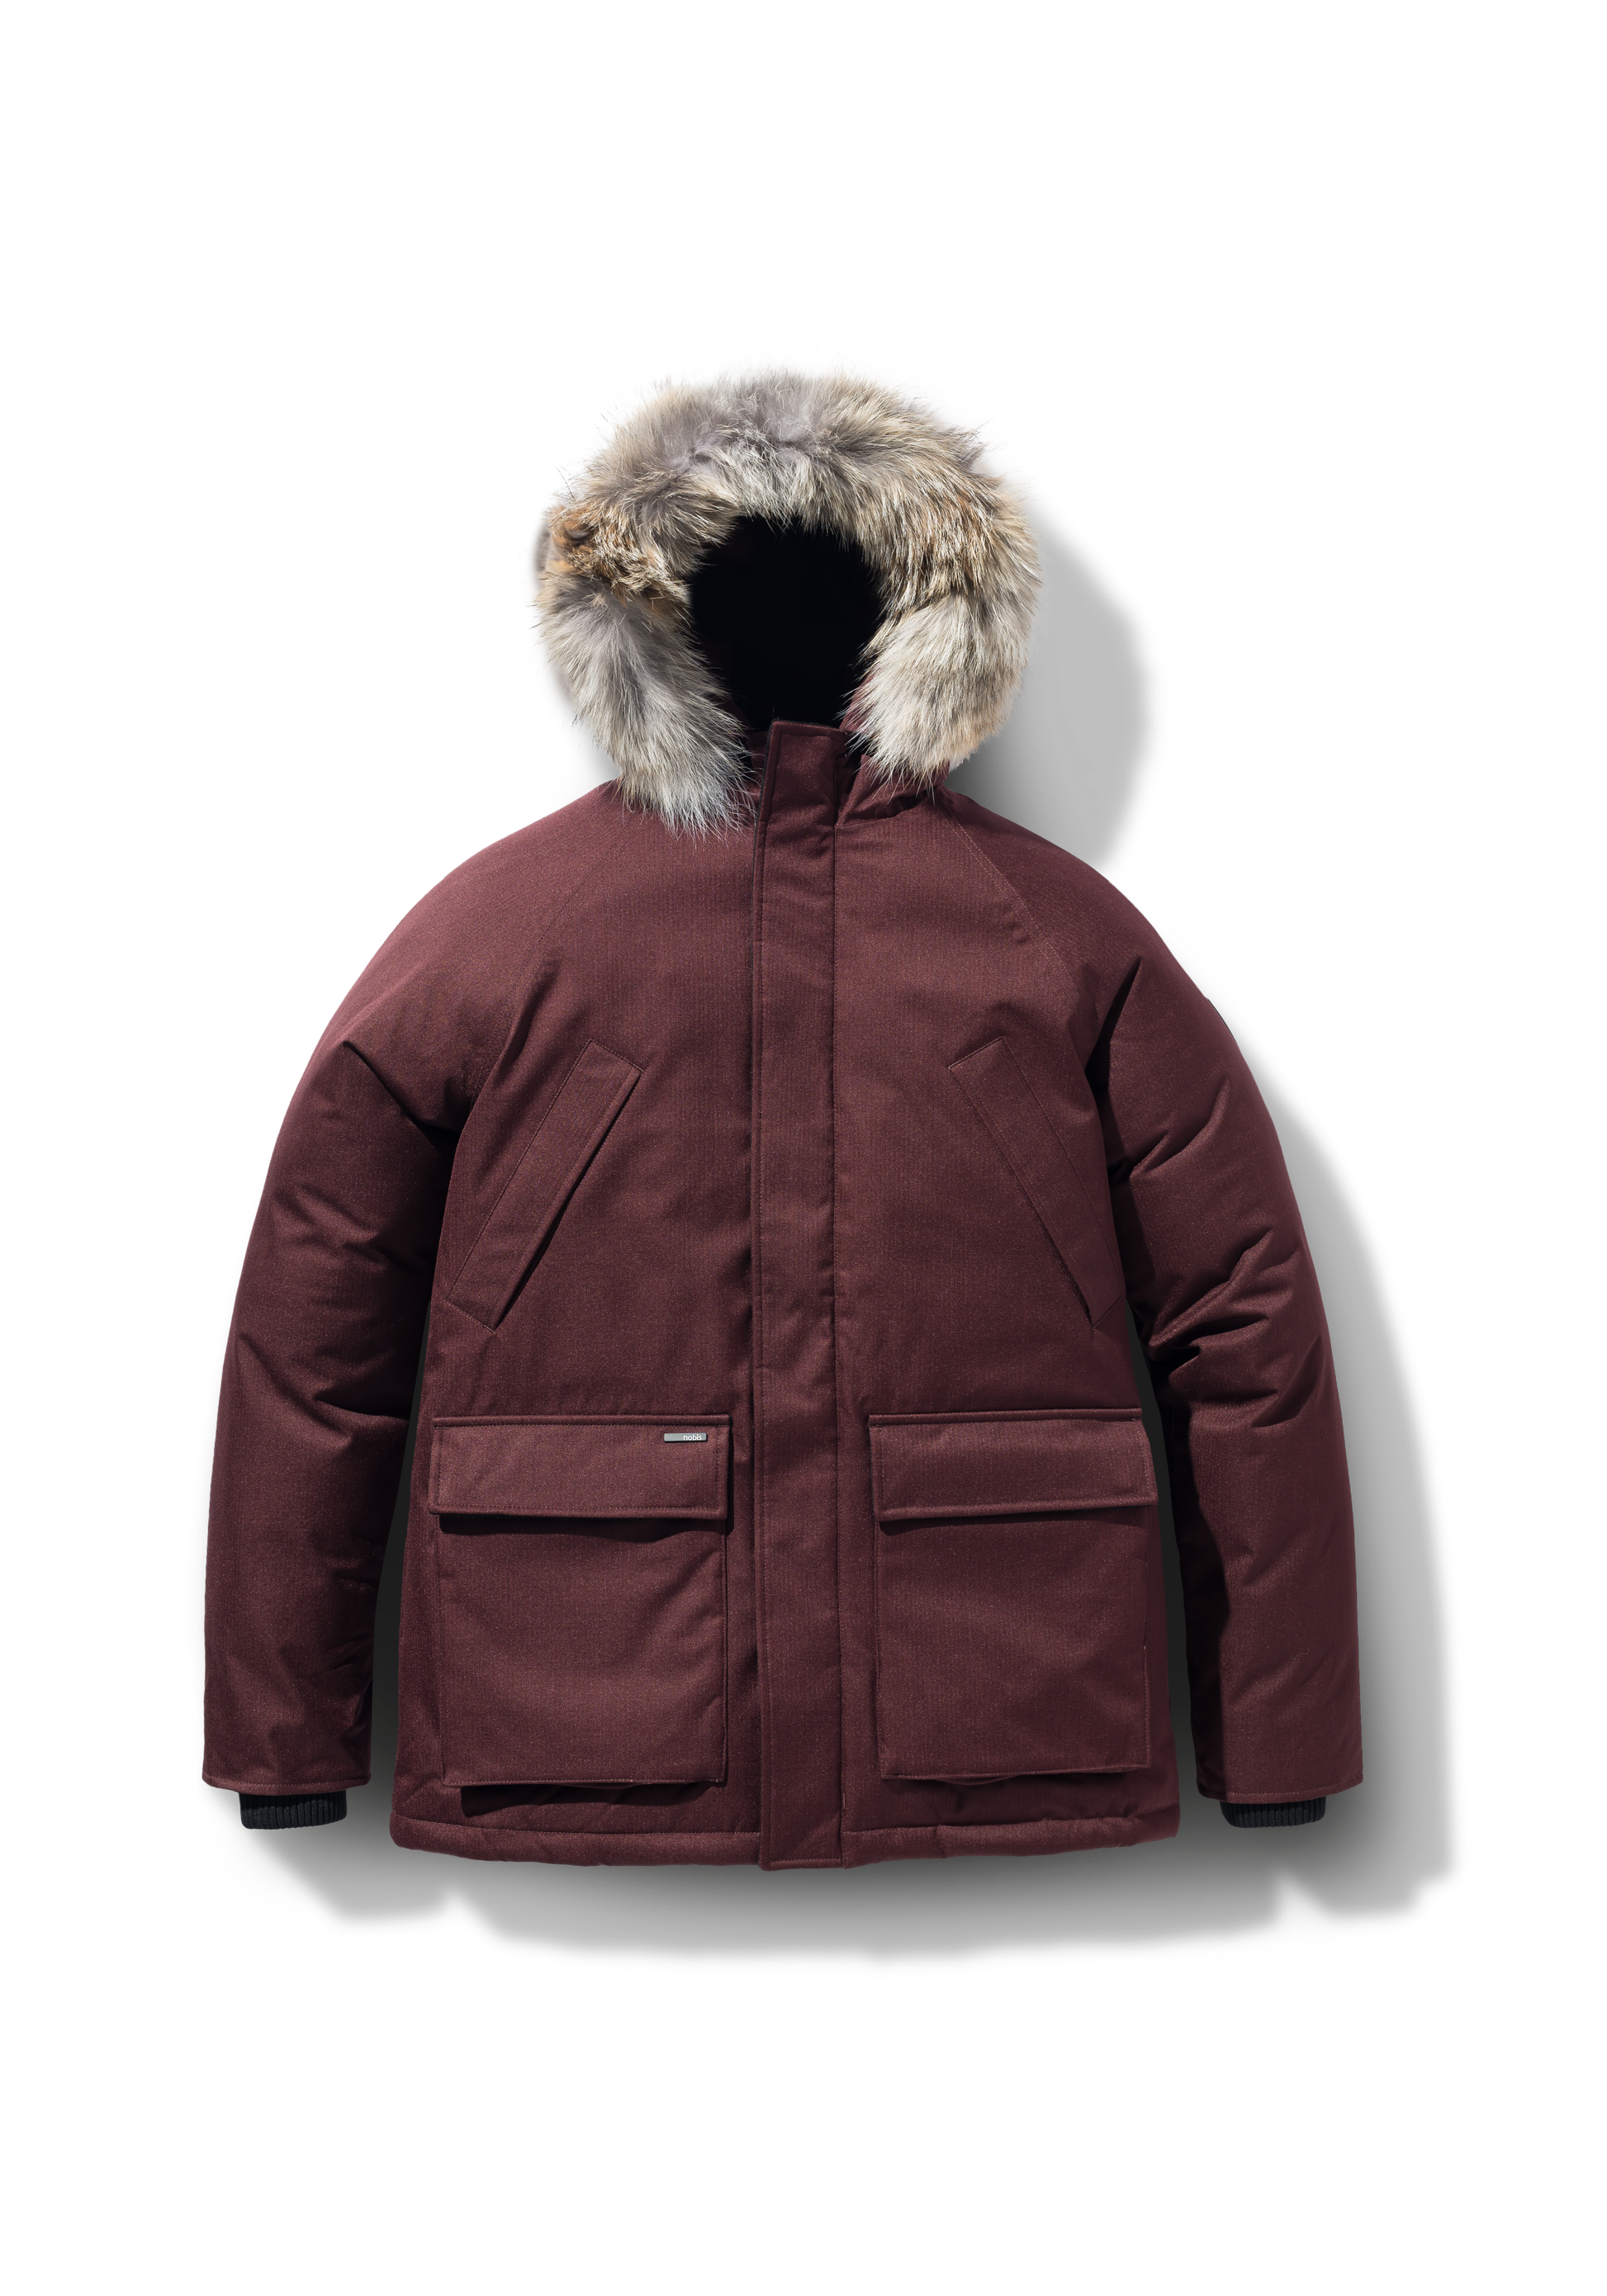 Men's waist length down filled jacket with two front pockets with magnetic closure and a removable fur trim on the hood in Merlot